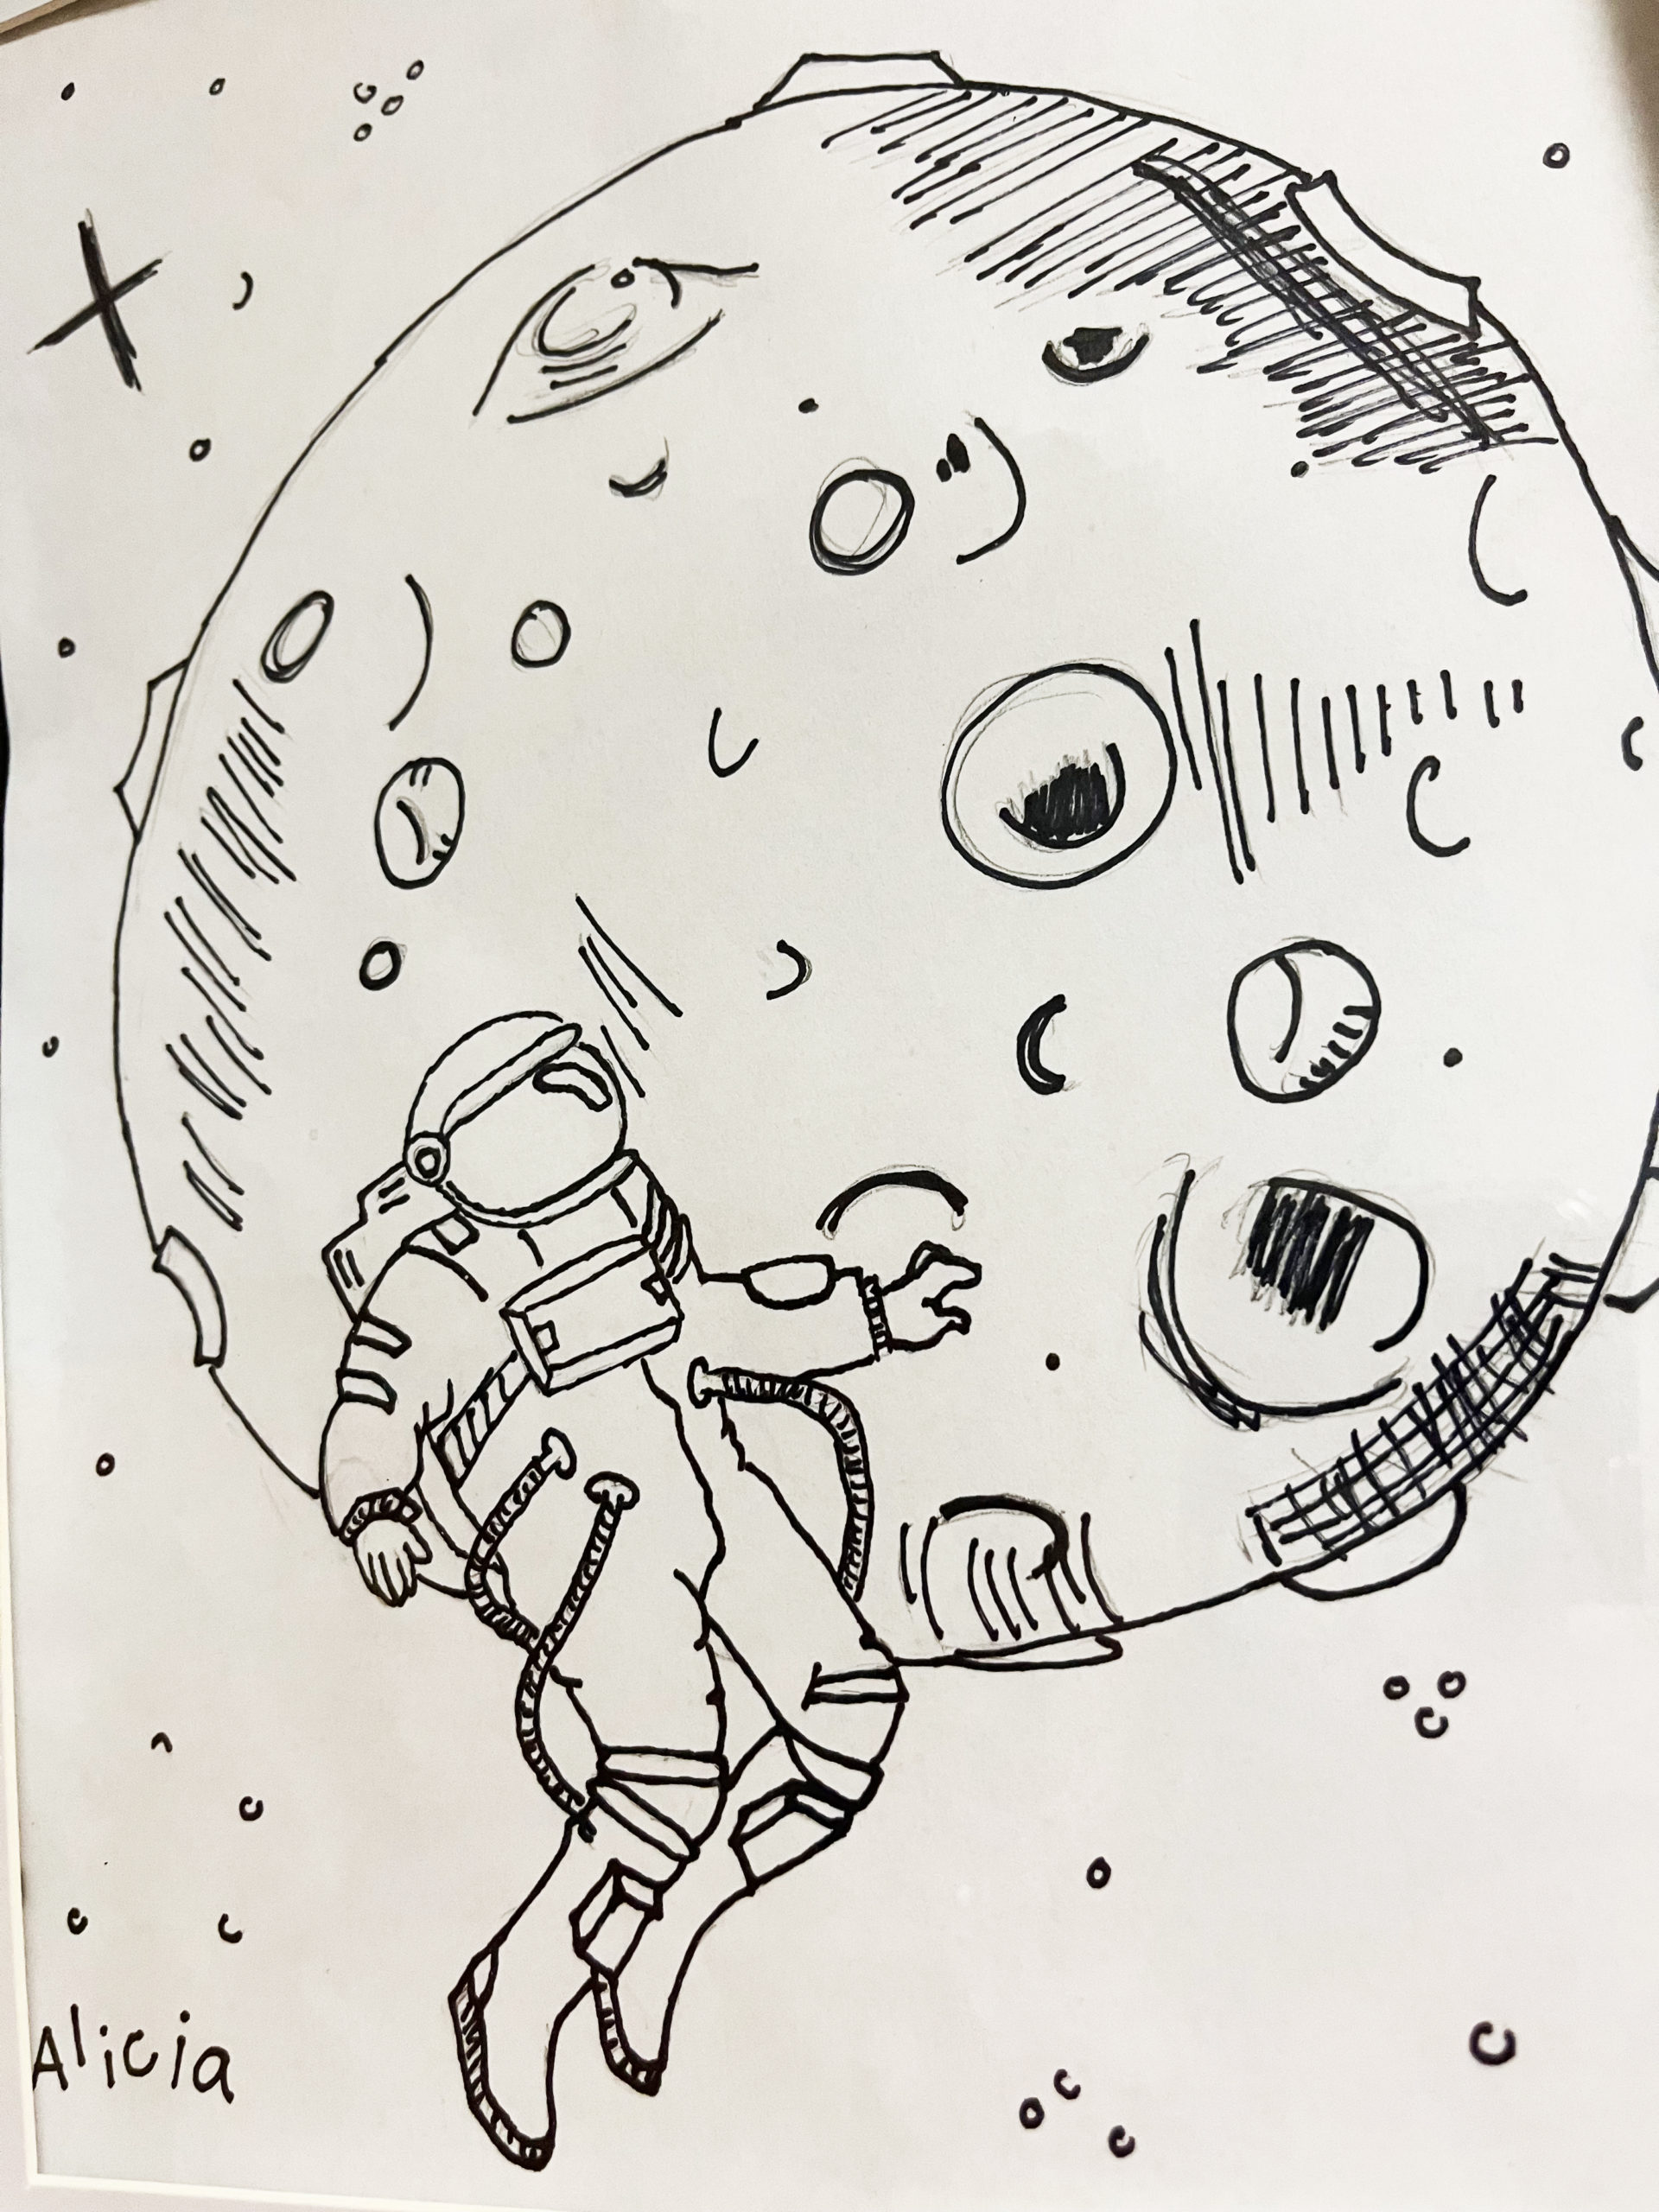 Outer space artwork by Alicia T. at St. Anne's School in Garden City, NY